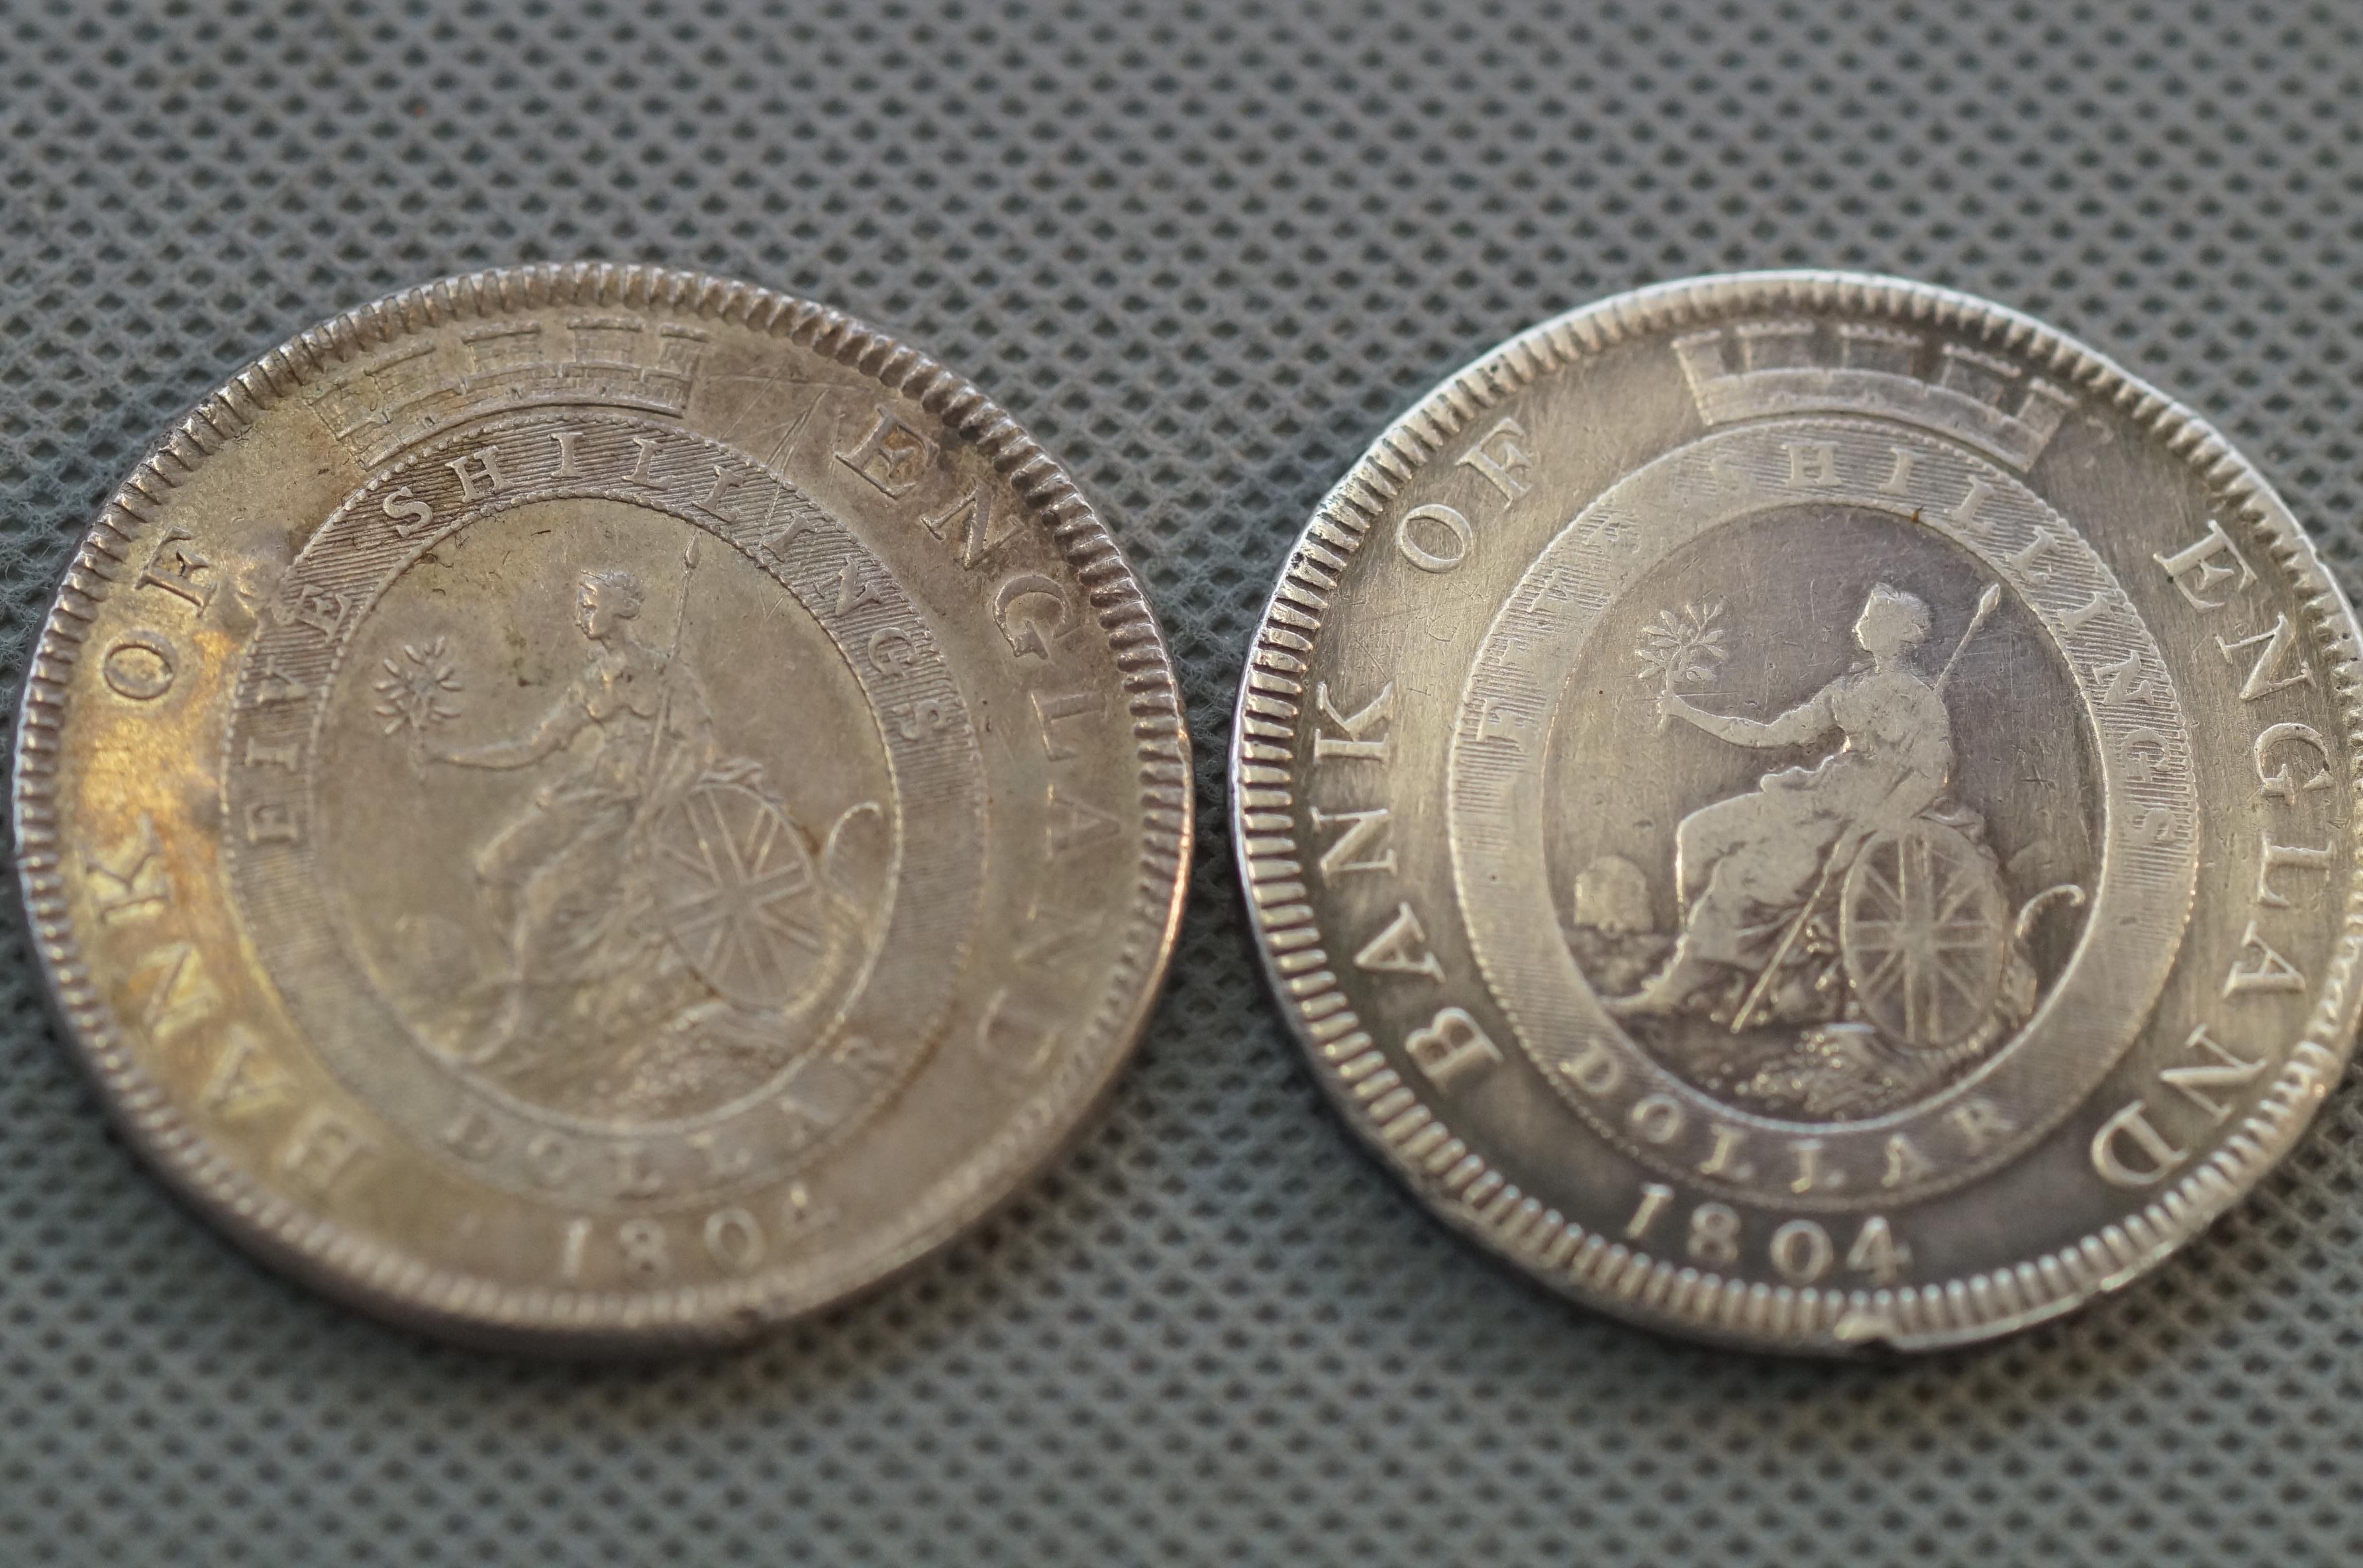 2x George III silver dollars dated 1804 - Image 2 of 2